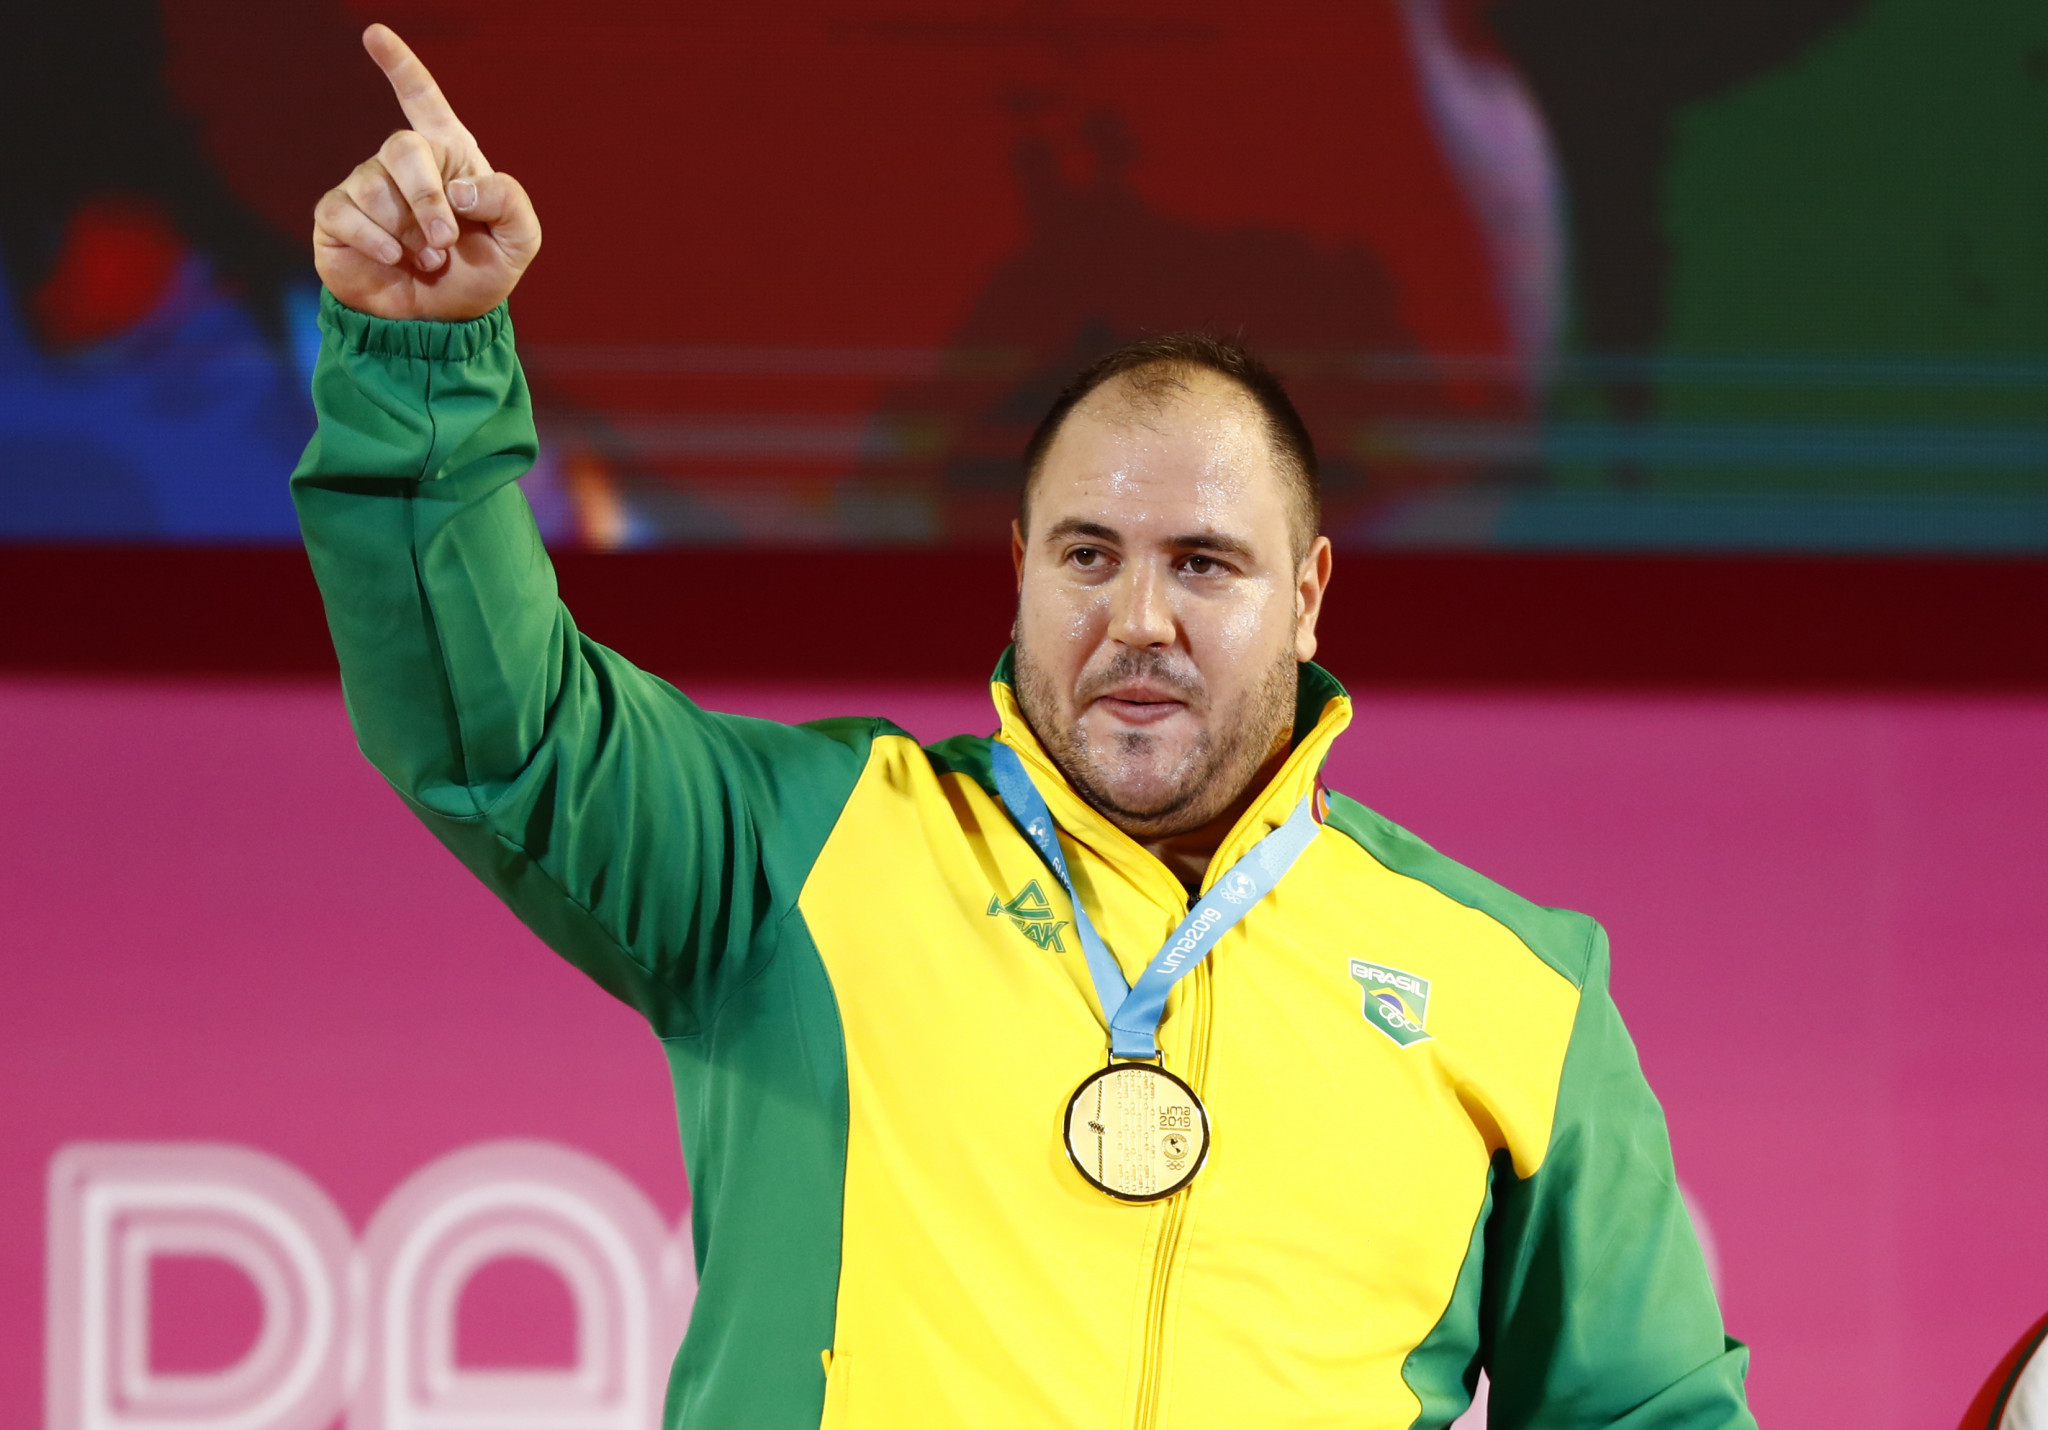 Brazil's Saraiva Reis earns third consecutive Pan American Games title as weightlifting concludes